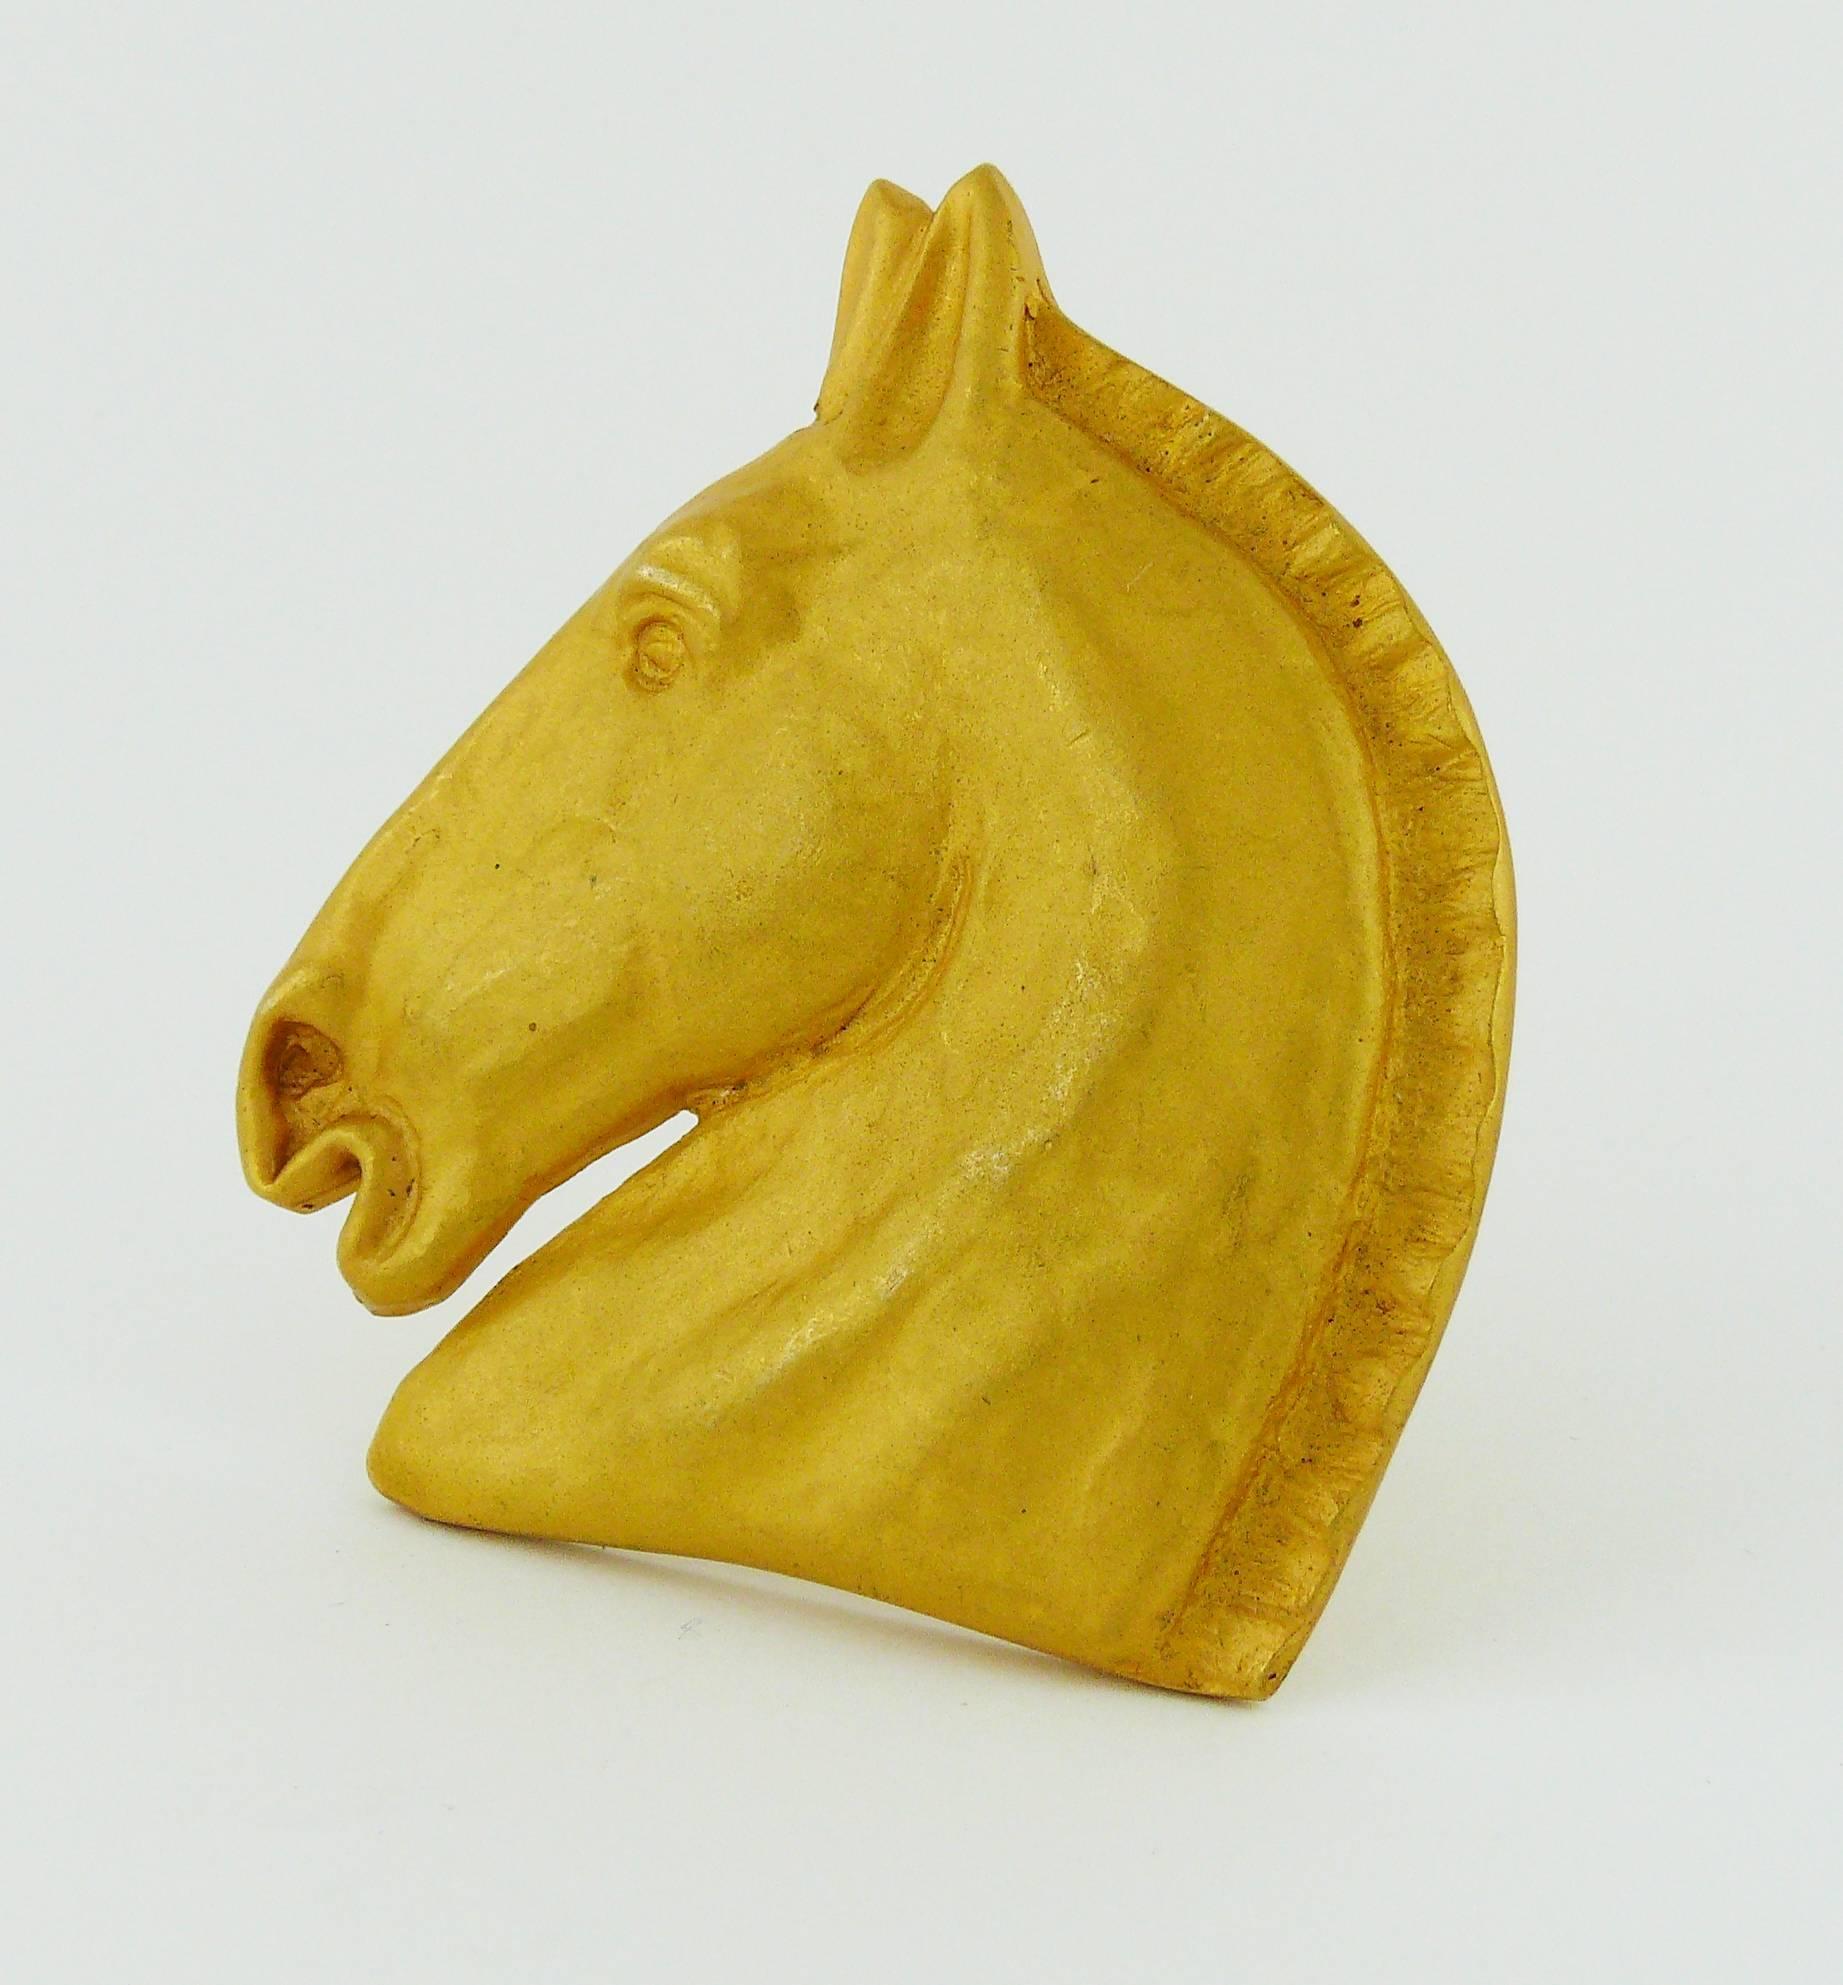 HERMES Paris vintage massive three dimensional matte gold tone horse head brooch.

Beautifully detailed !

Embossed HERMES Paris Bijouterie Fantaisie.

JEWELRY CONDITION CHART
- New or never worn : item is in pristine condition with no